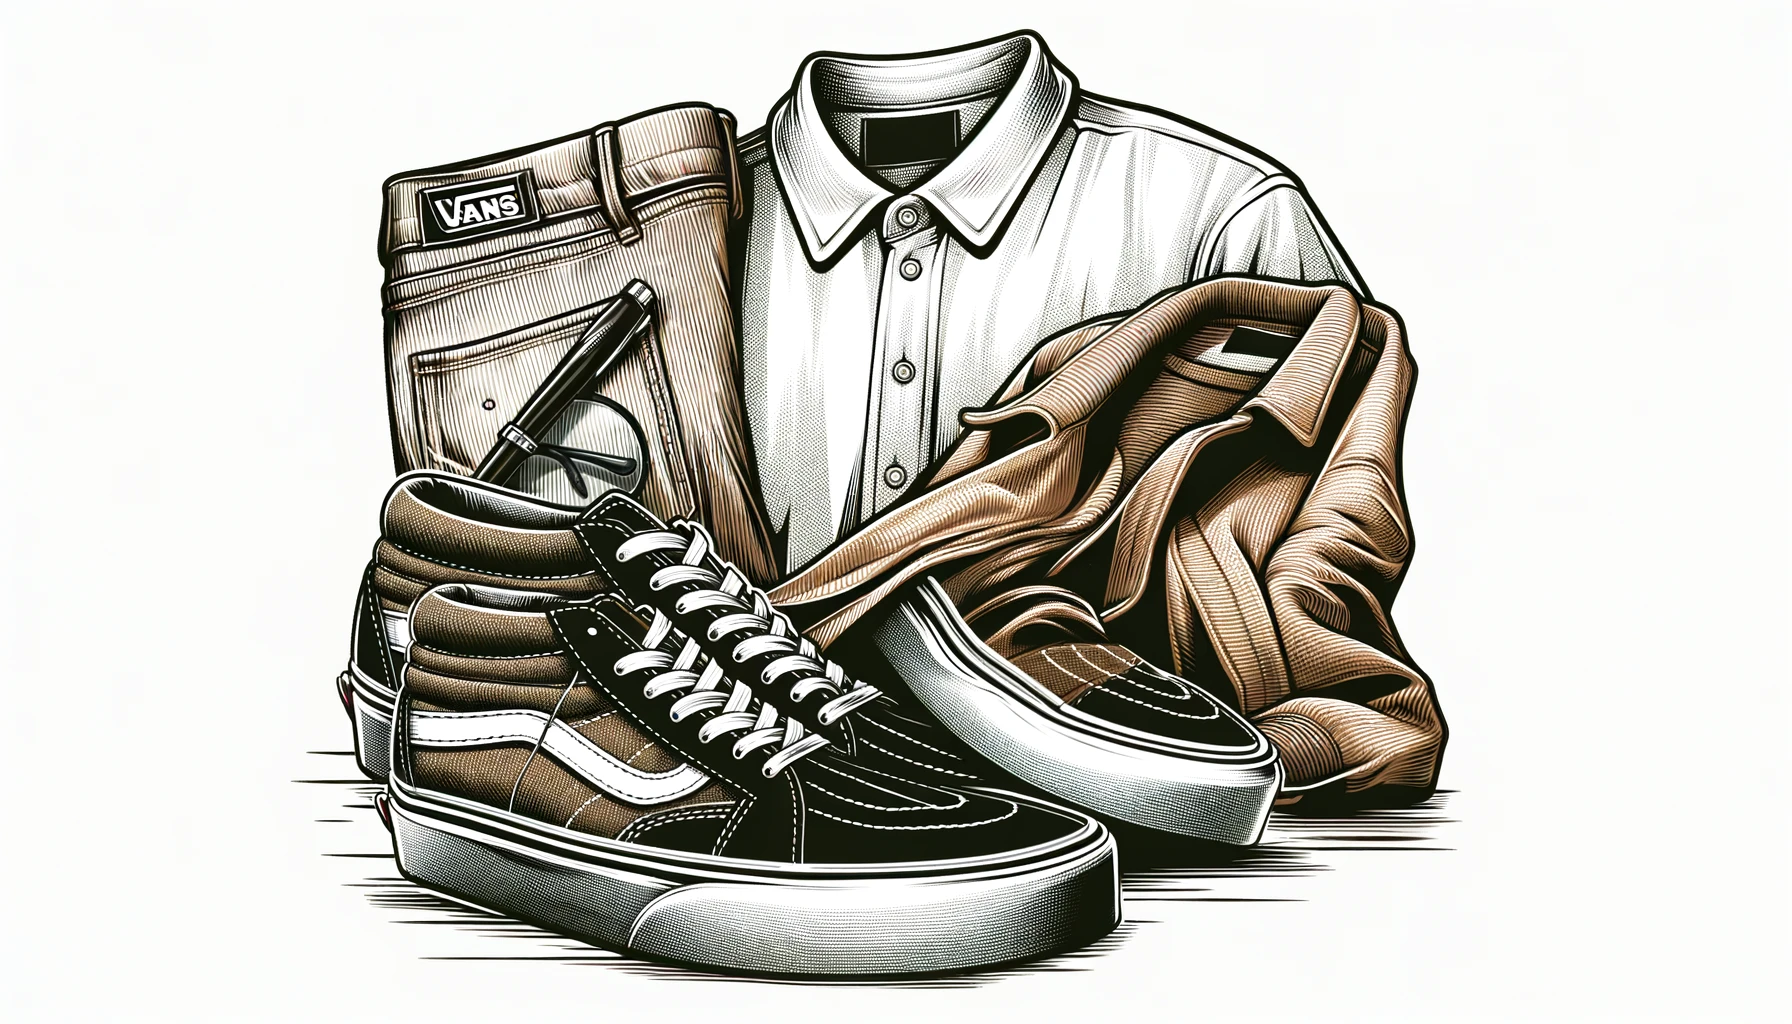 An image showing a stylish outfit paired with VANS sneakers, emphasizing a fashionable look. The text 'VANS' is prominently displayed.